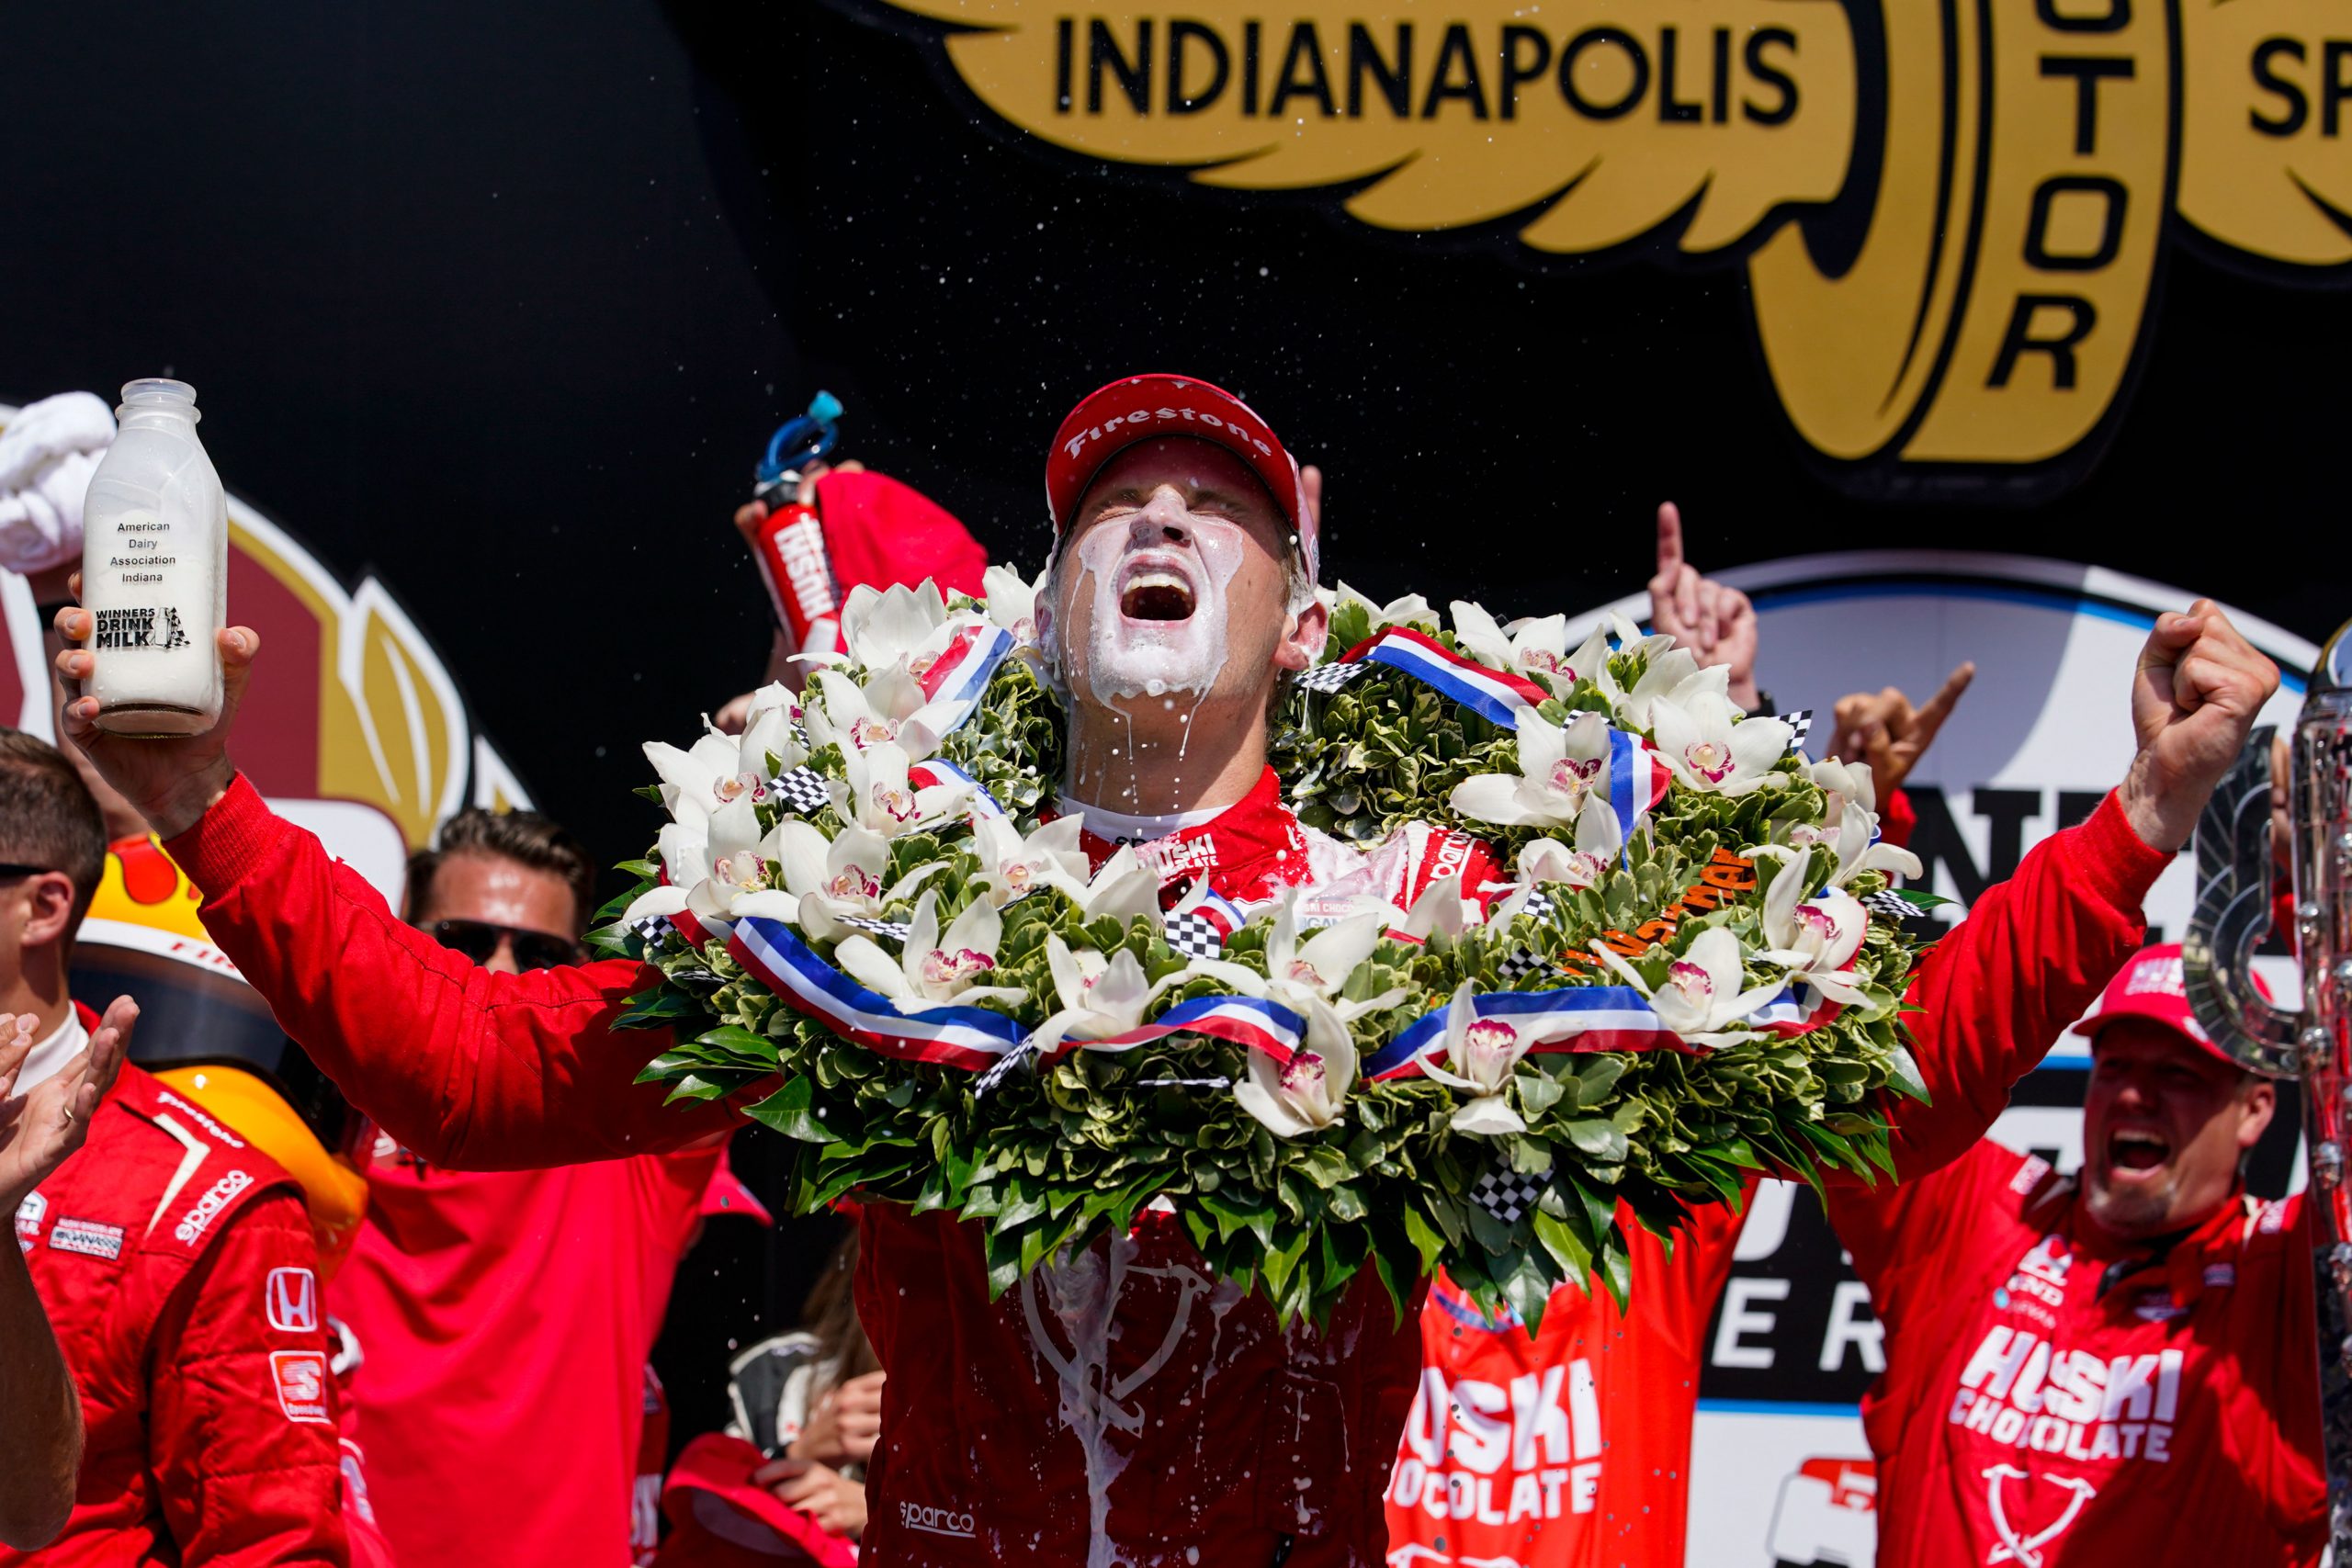 Marcus Ericsson wins Indianapolis 500 after late stoppage drama